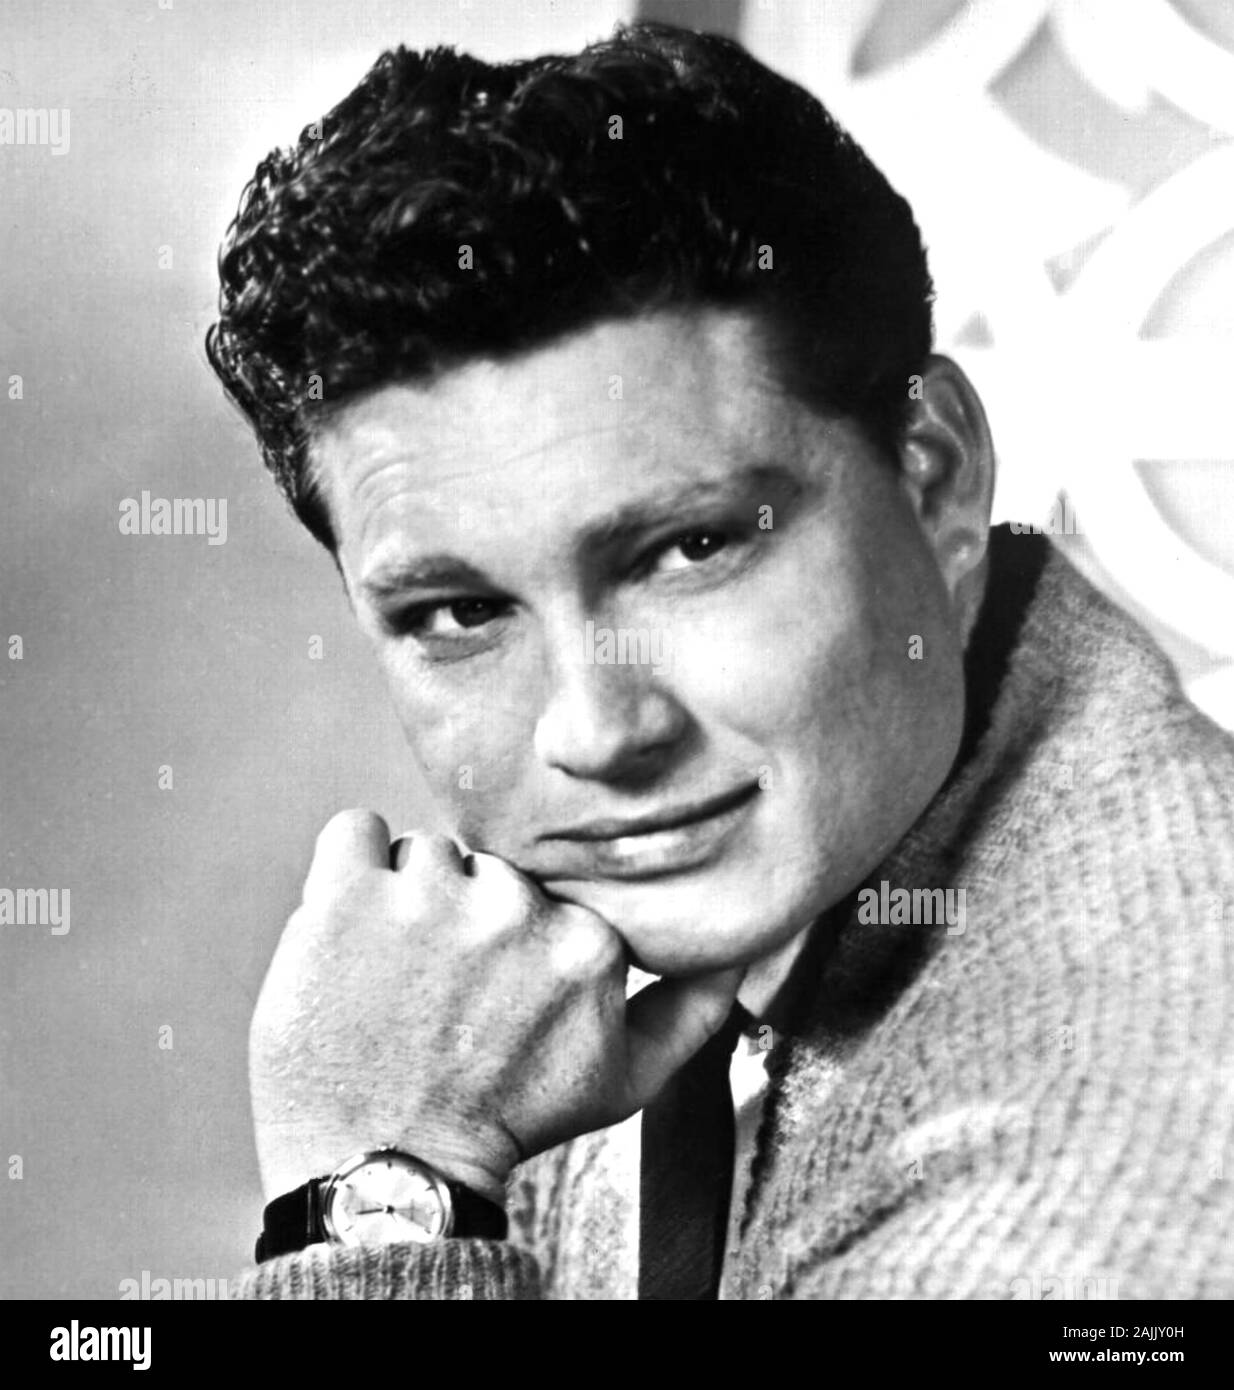 BRUCE CHANEL Promotional photo of American singer-songwriter about 1965 Stock Photo